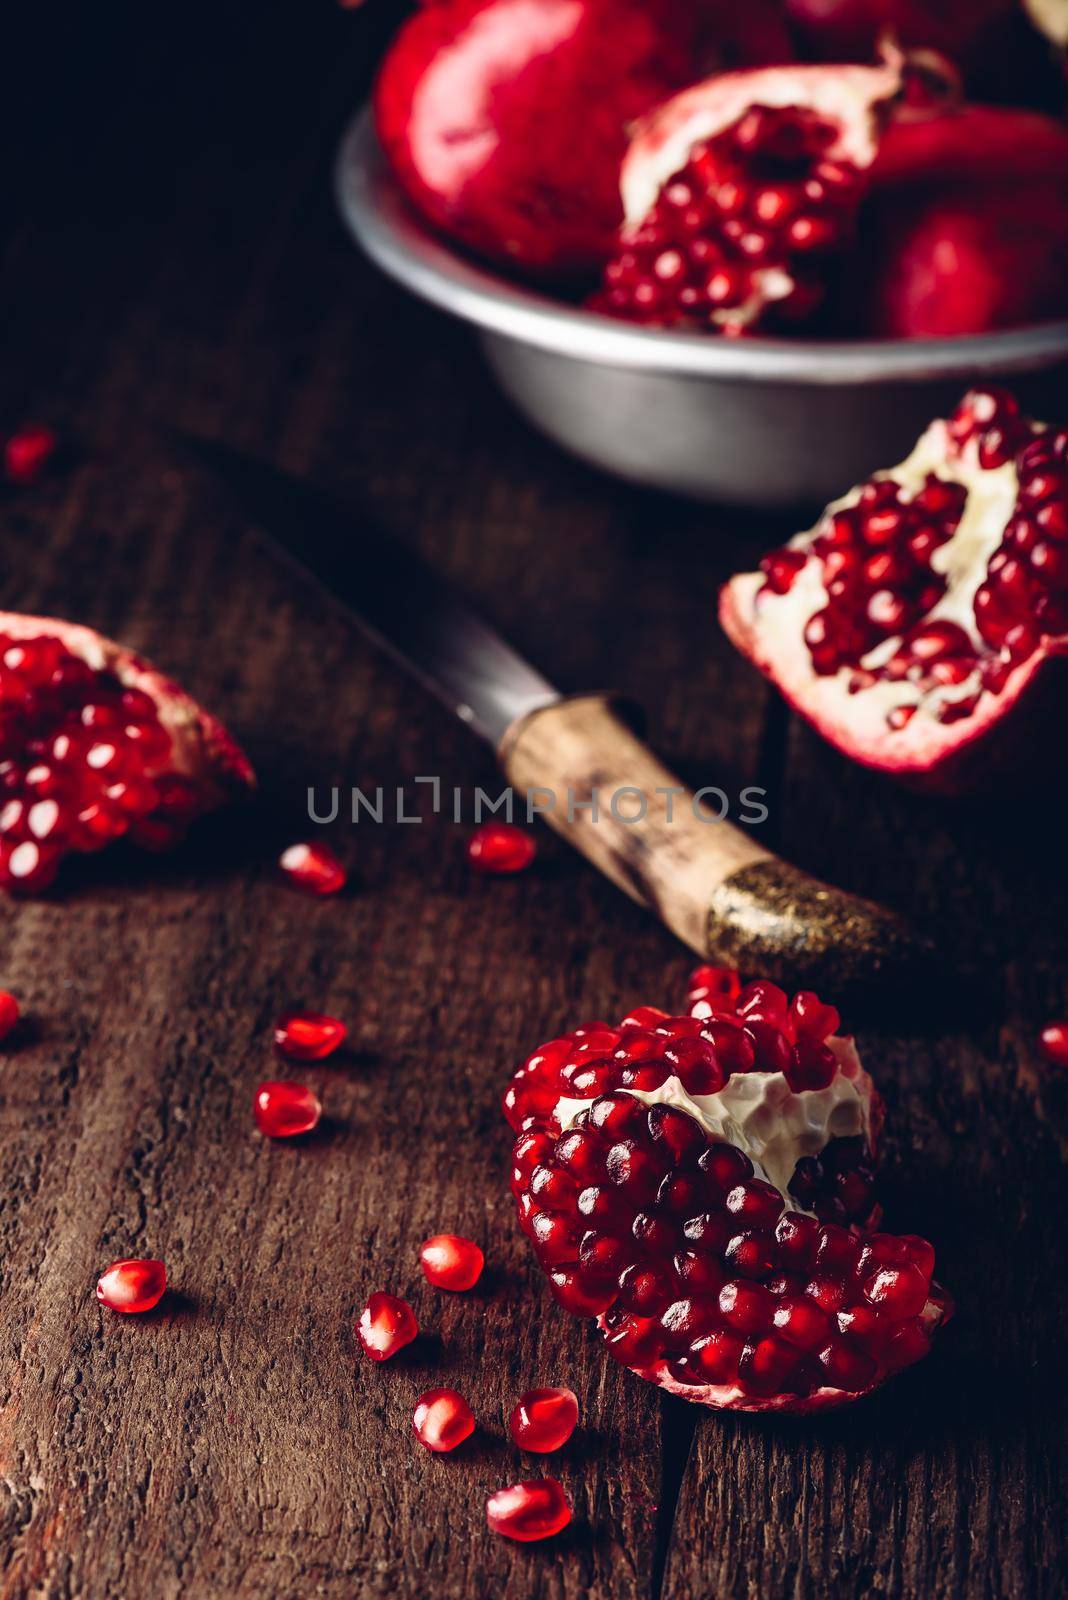 Pomegranate pieces with knife on rustic wooden surface.